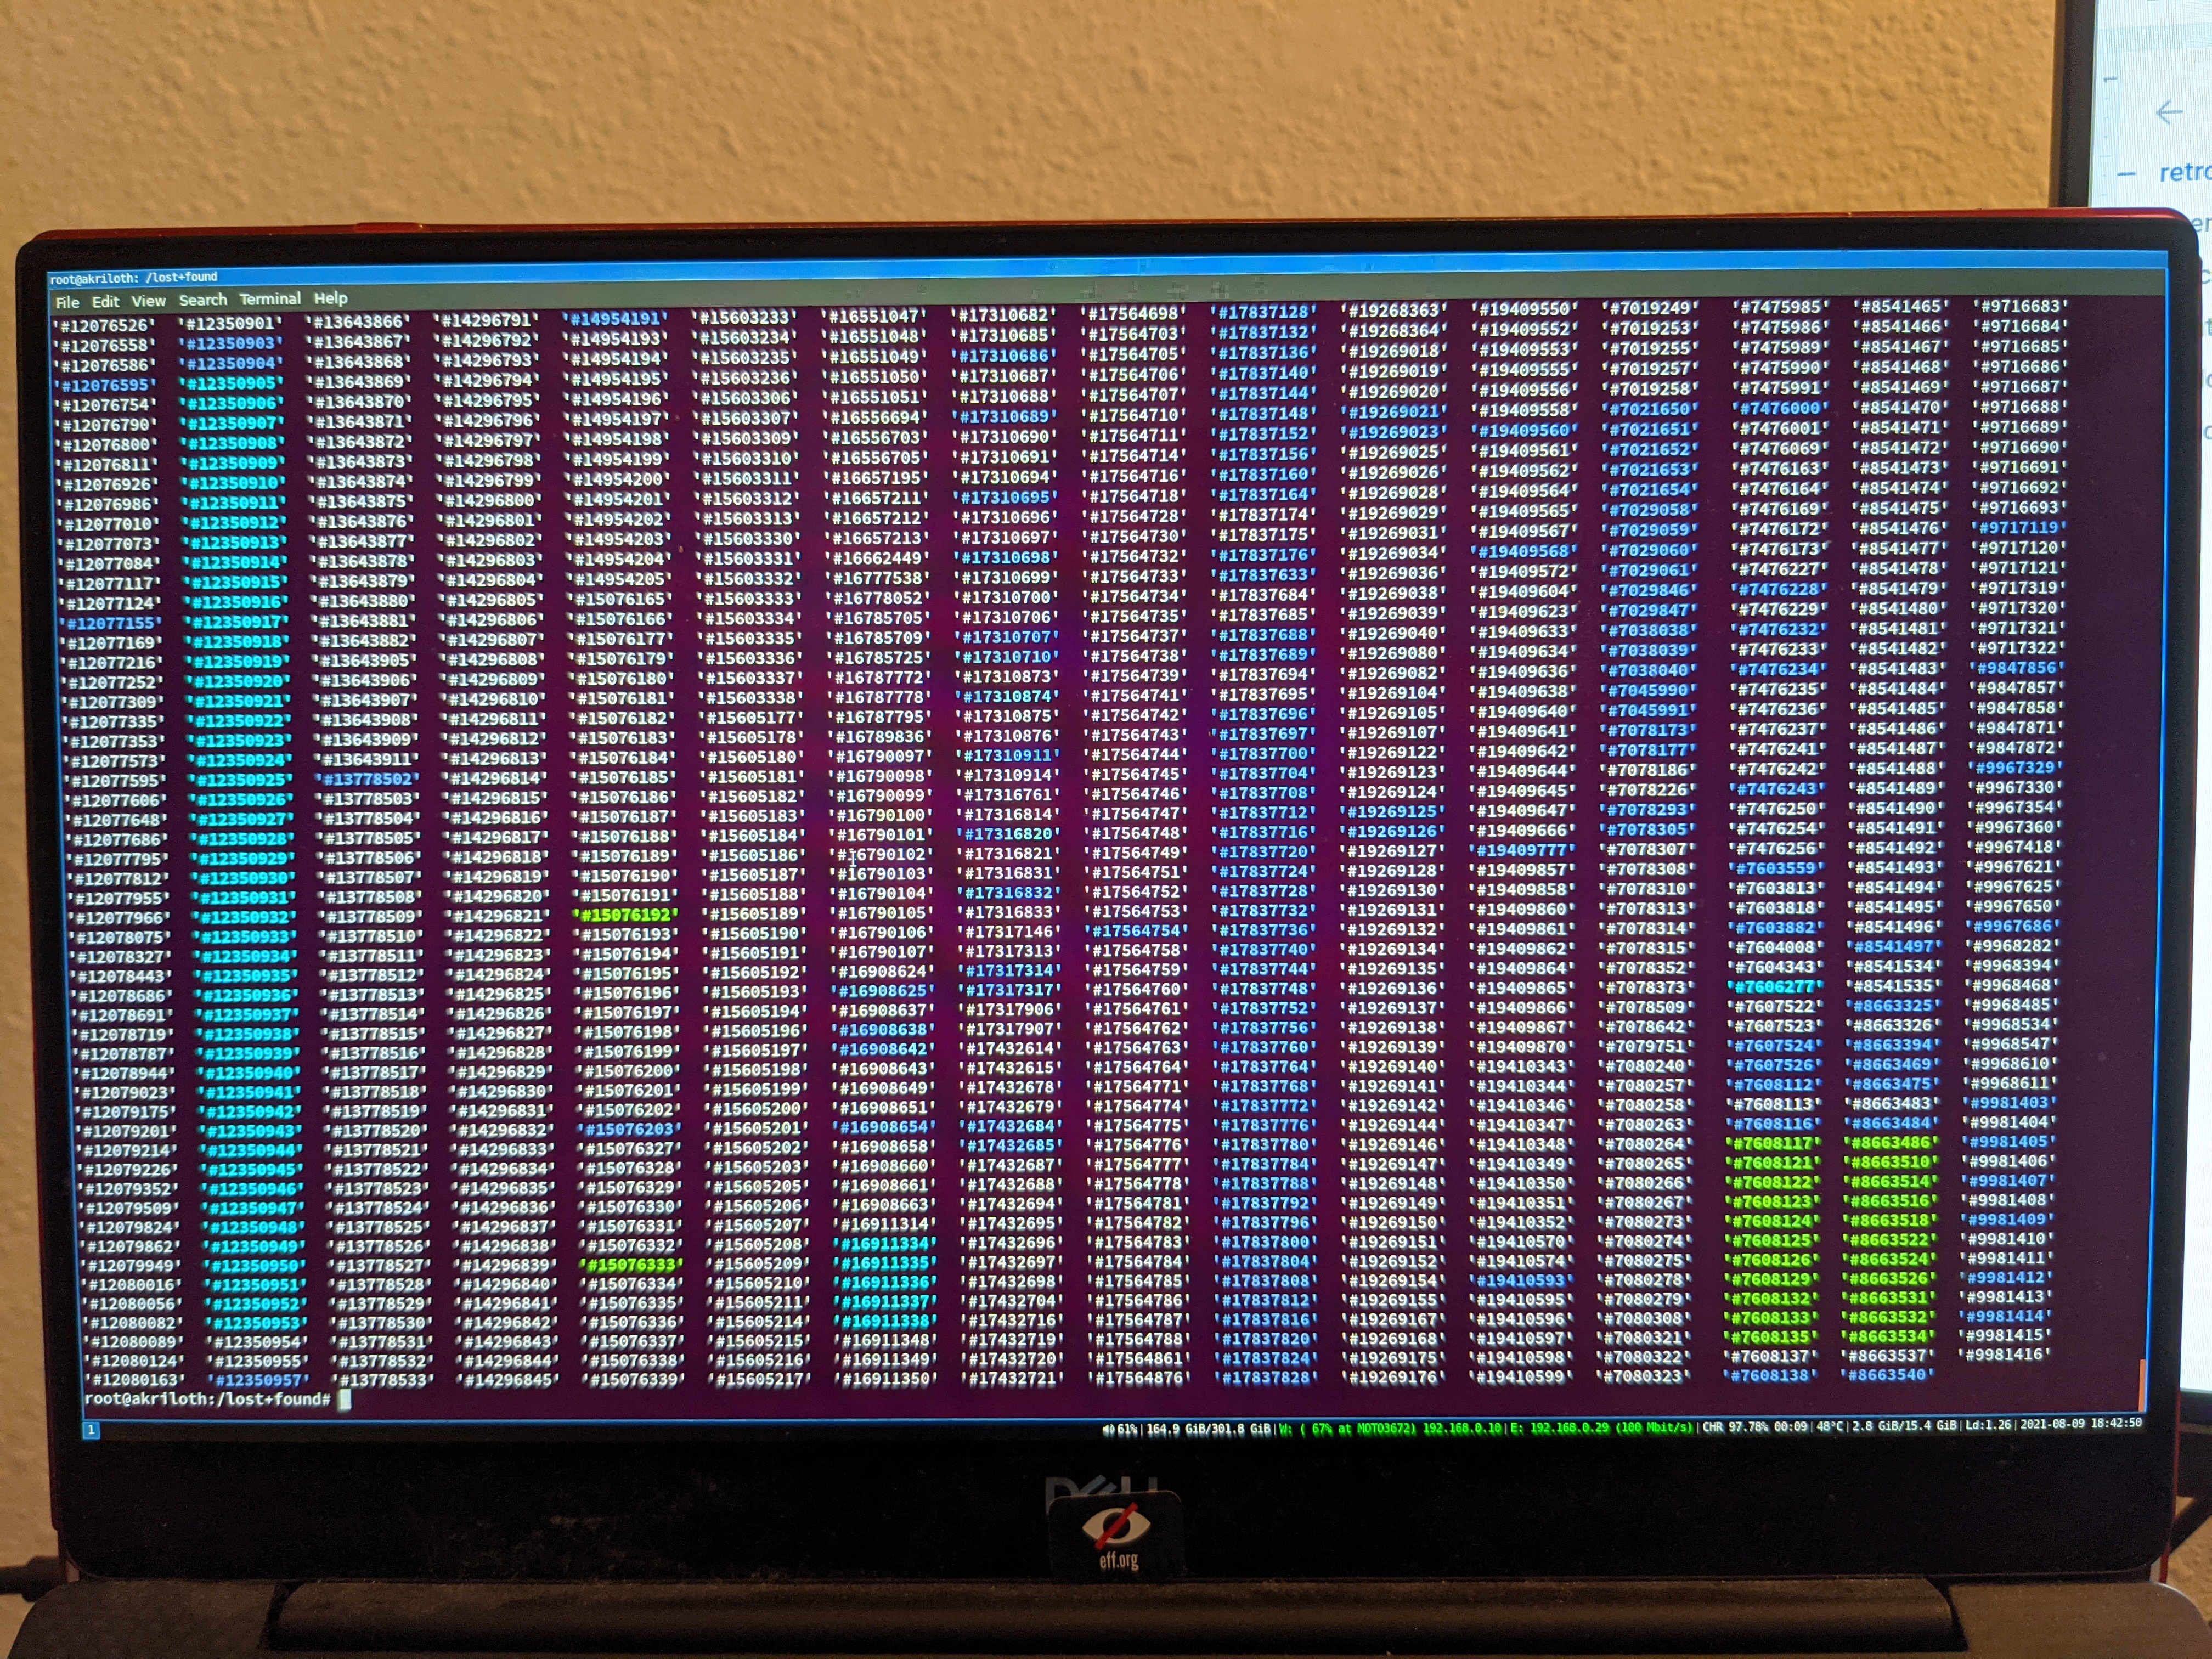 Terminal in the /lost+found directory, which is full of files. Picture of screen.